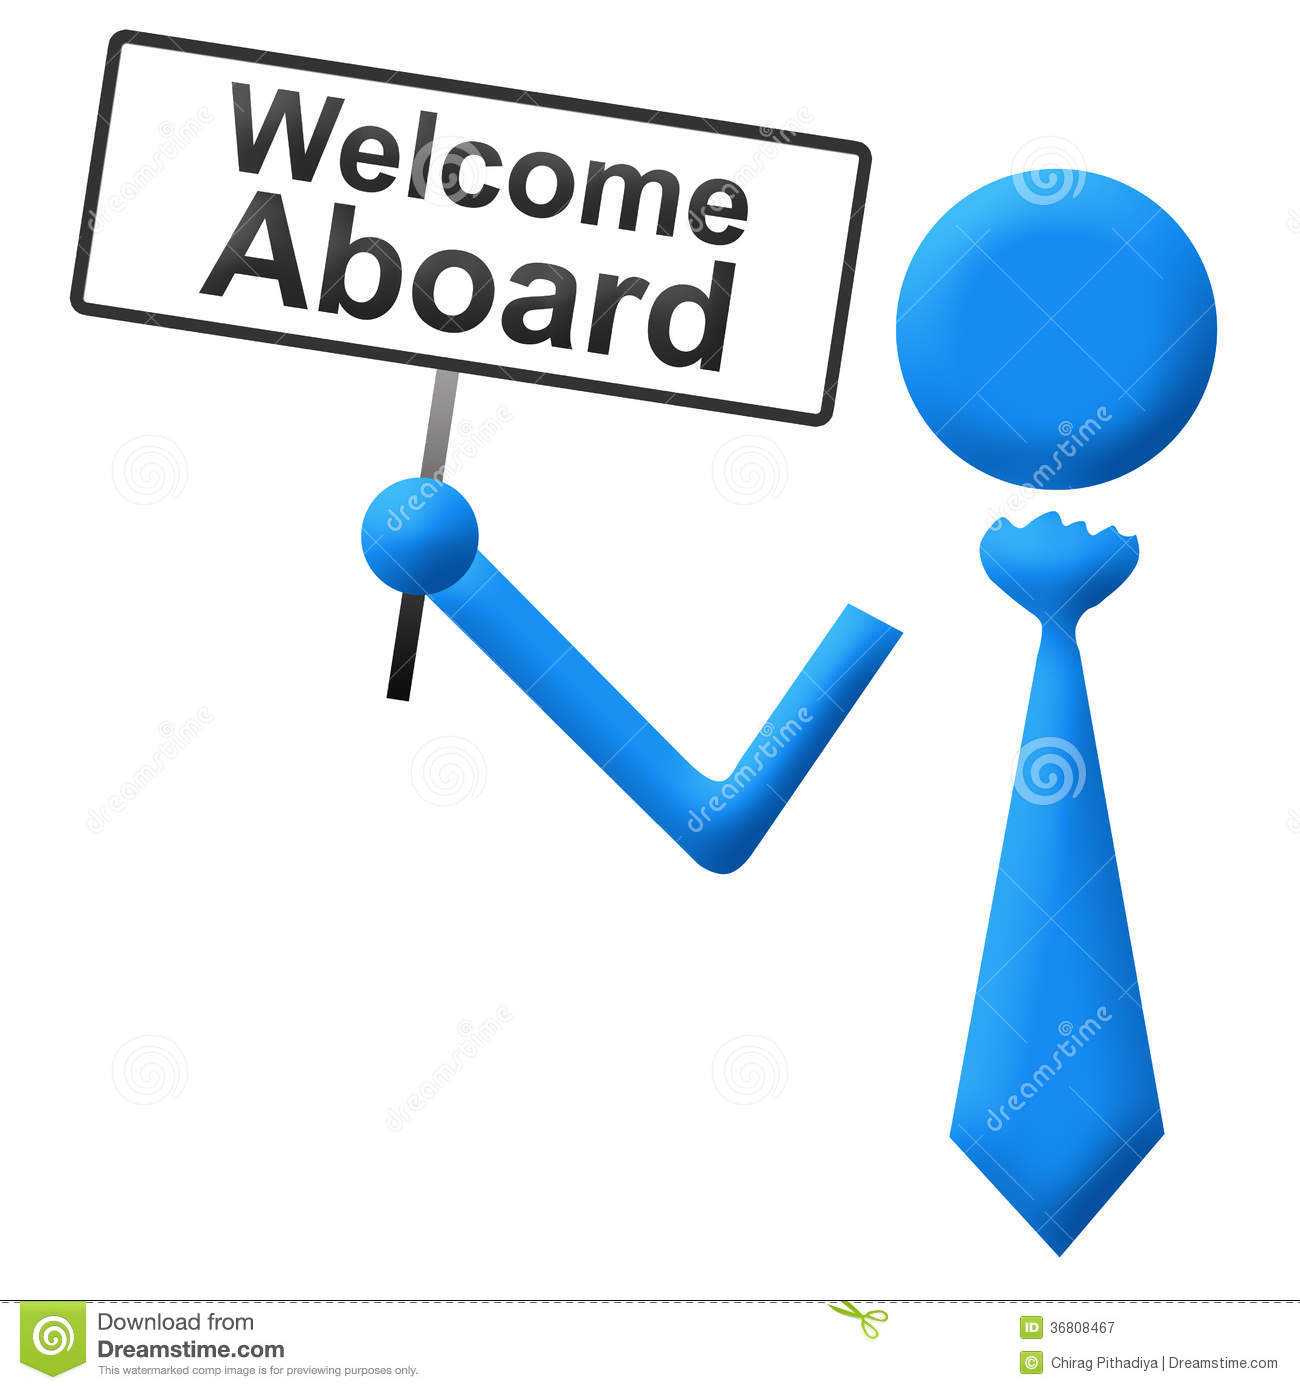 Welcome Aboard Human With Signboard Royalty Free Stock Photography    